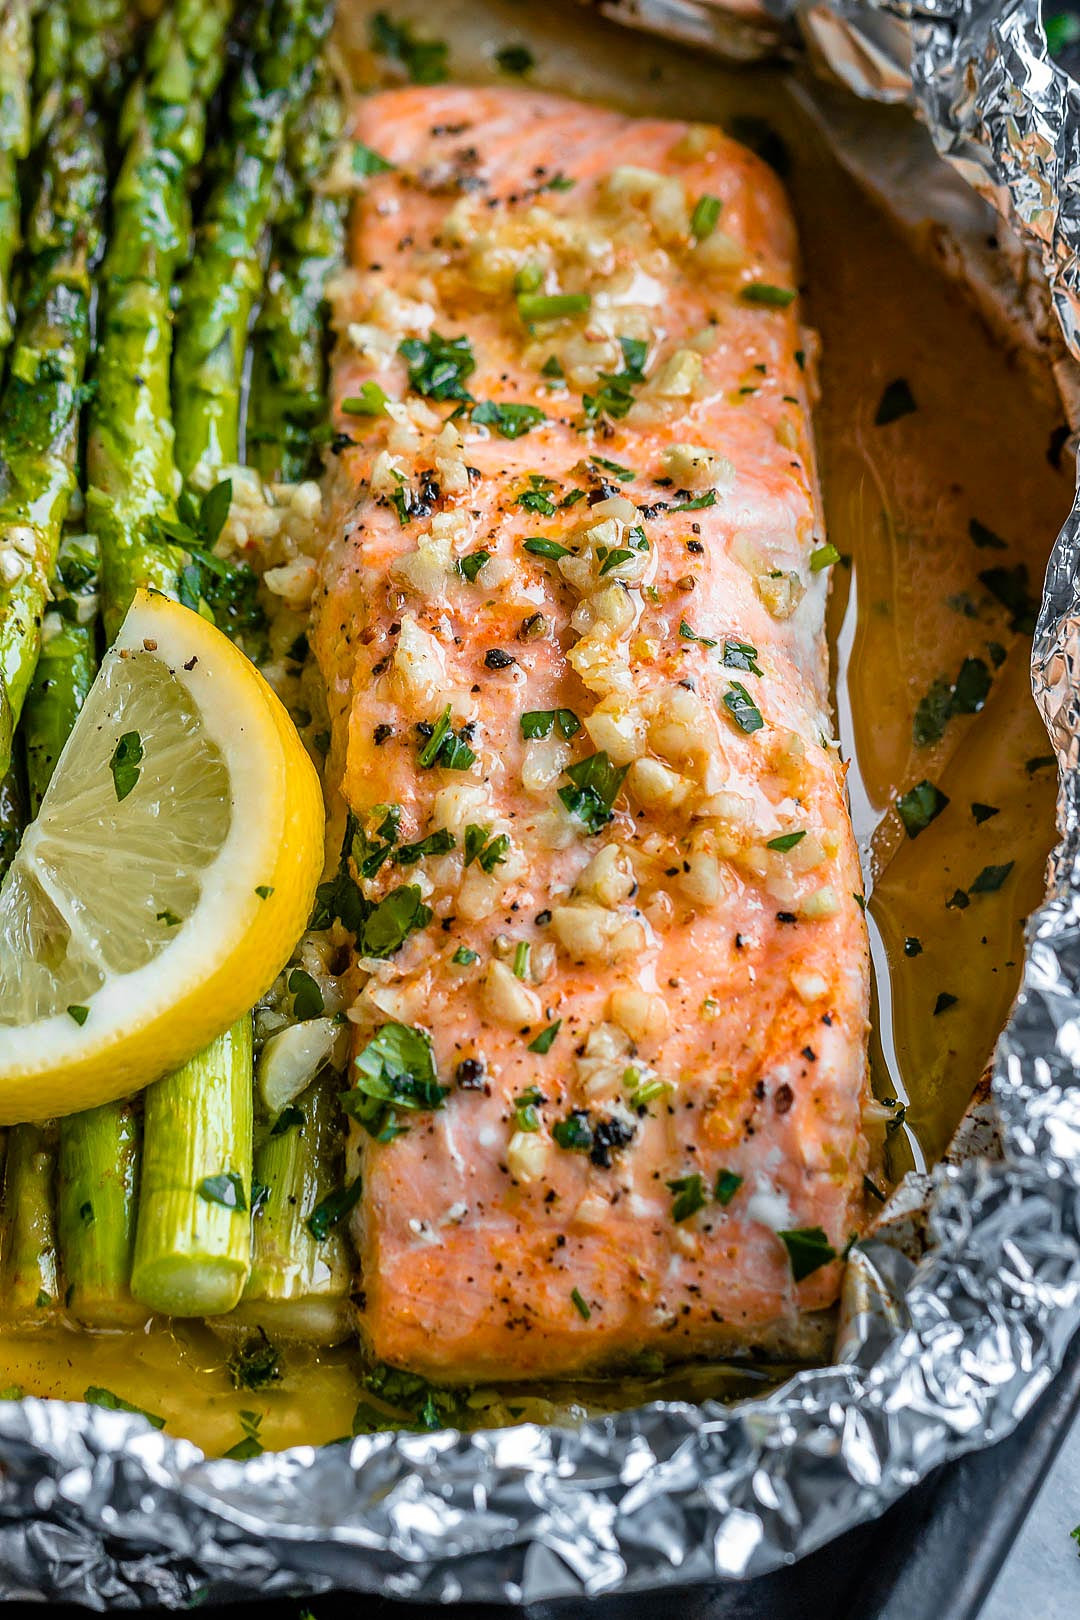 Salmon With Asparagus
 Baked Salmon in Foil Packs with Asparagus and Garlic